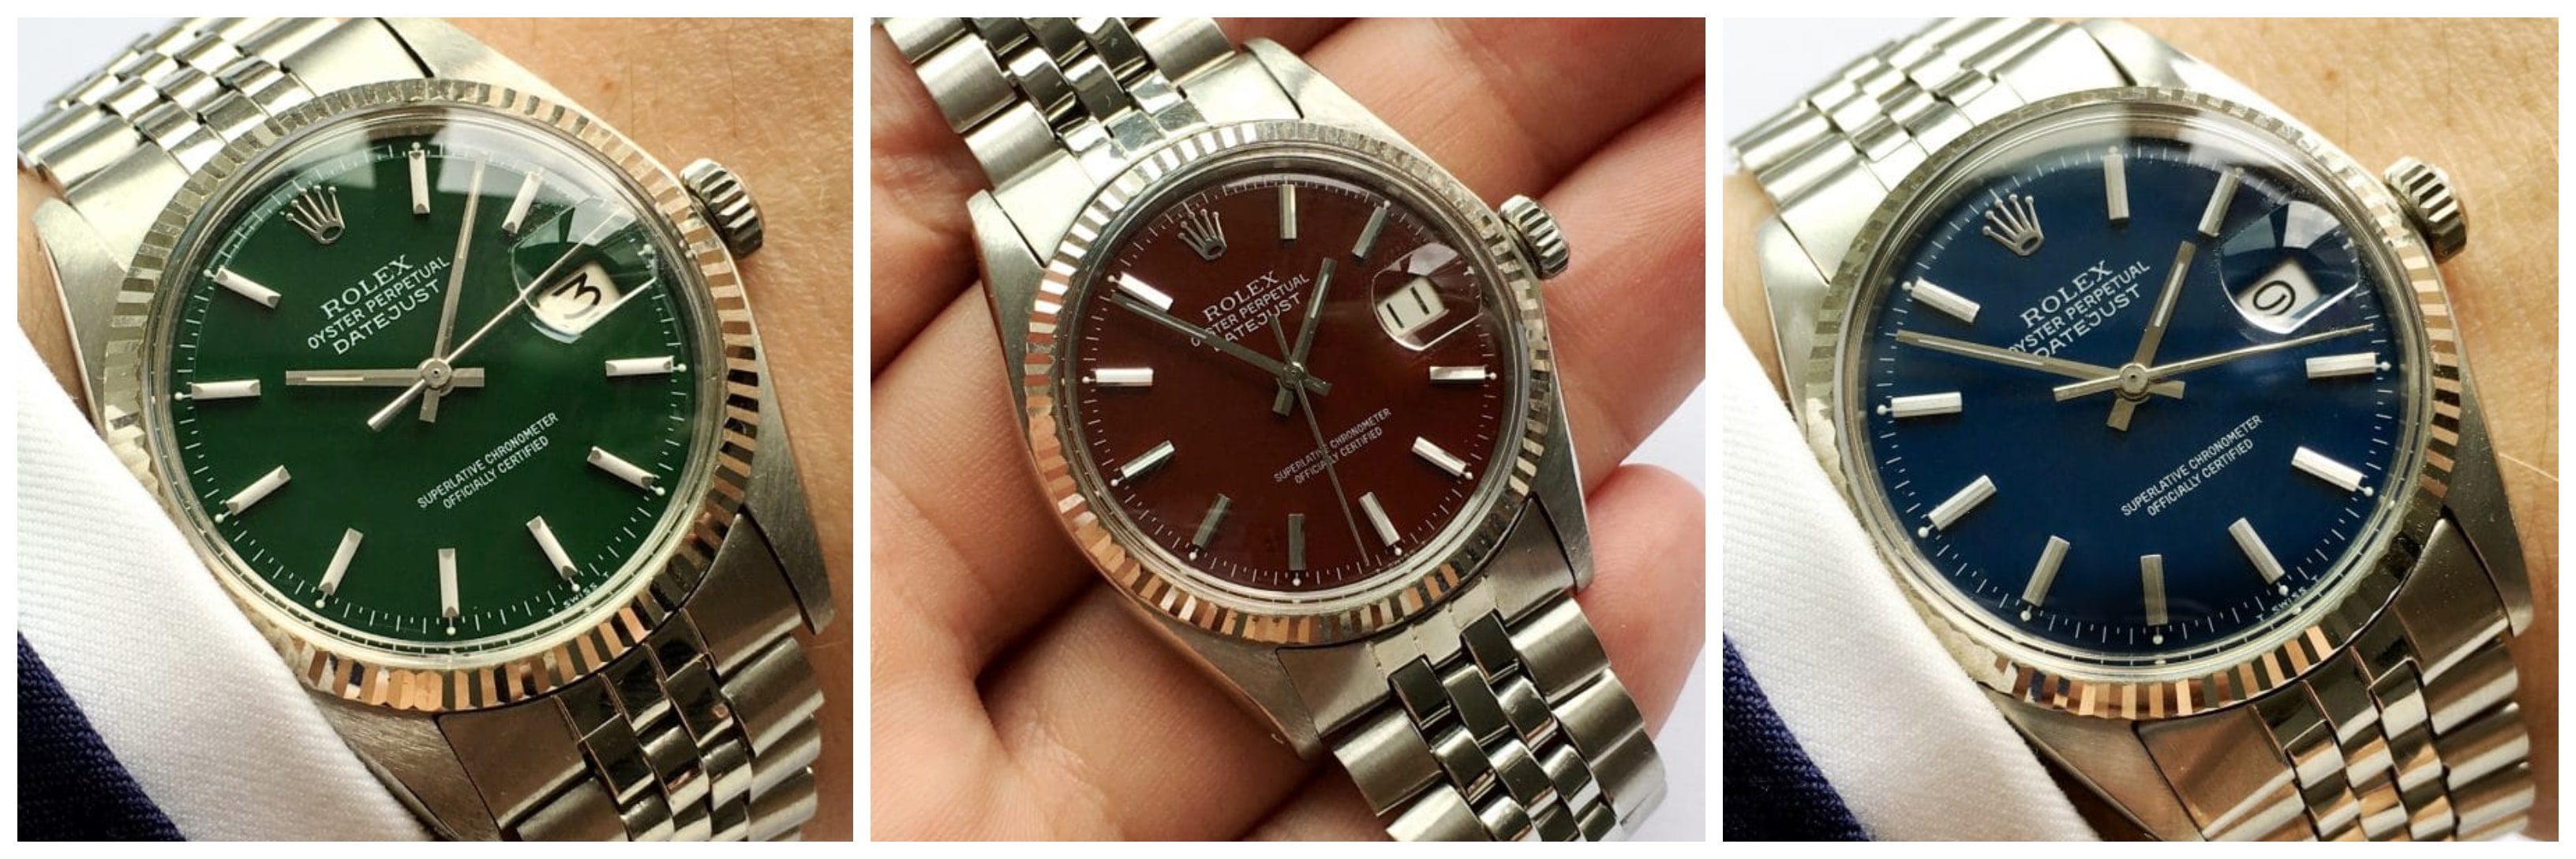 Do all rolex have date?